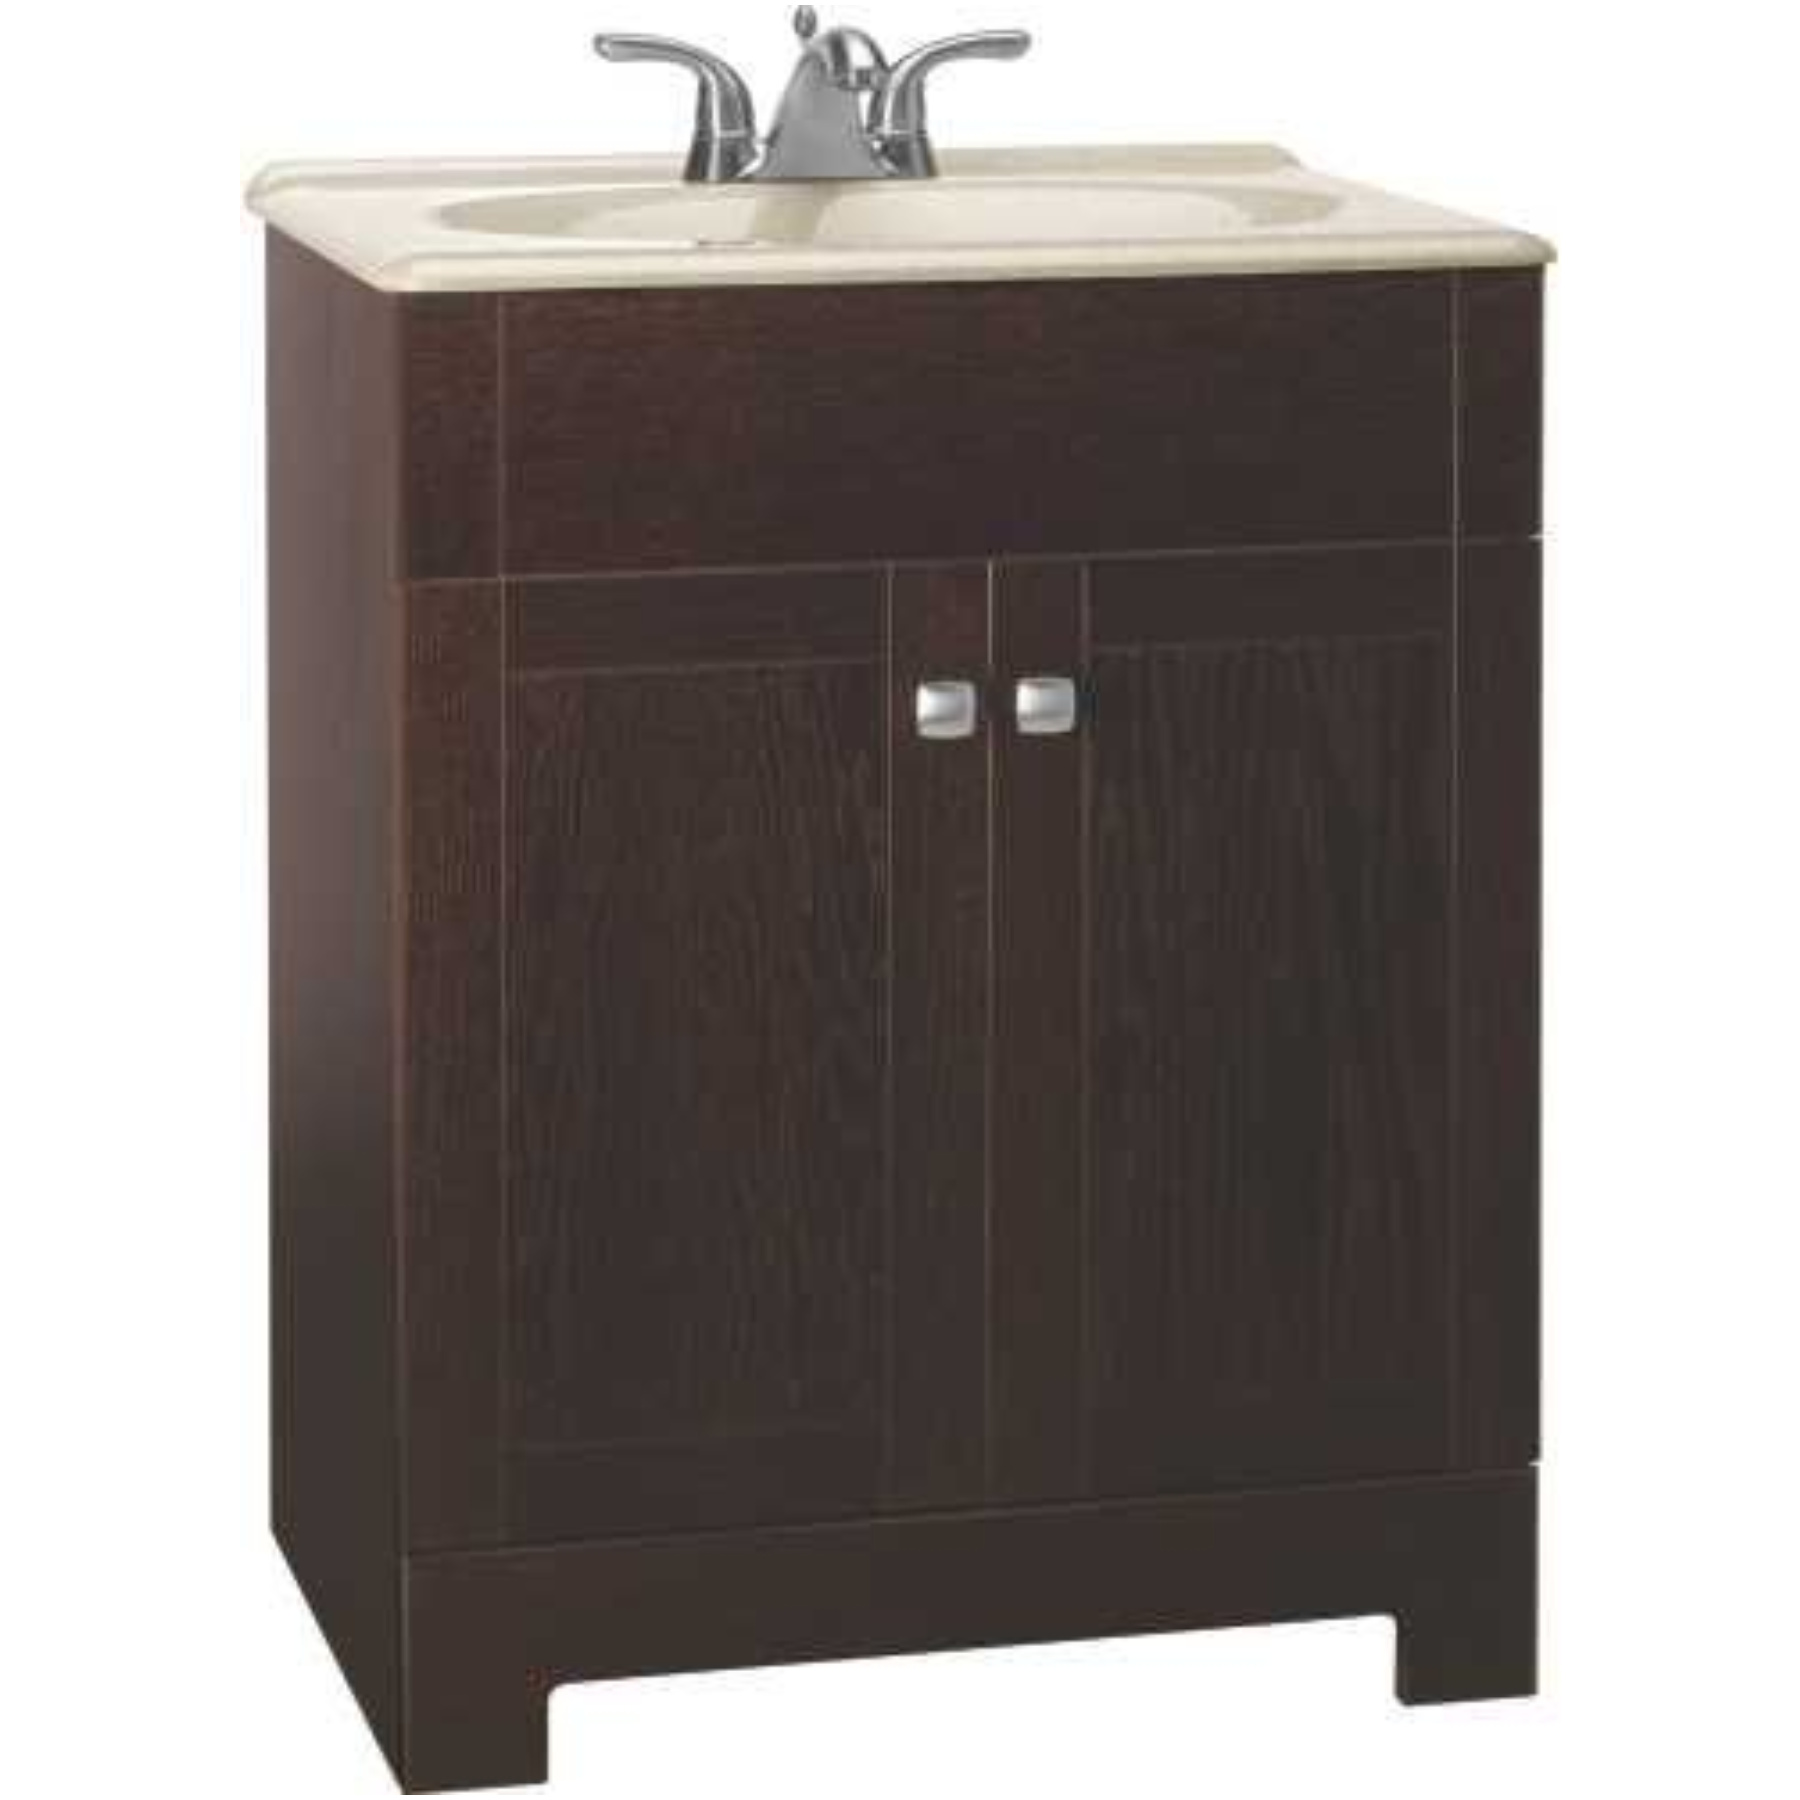 RSI HOME PRODUCTS SEDONA COMBO BATHROOM VANITY CABINET WITH BEIGE SST TOP, FULLY ASSEMBLED, JAVA, 30"